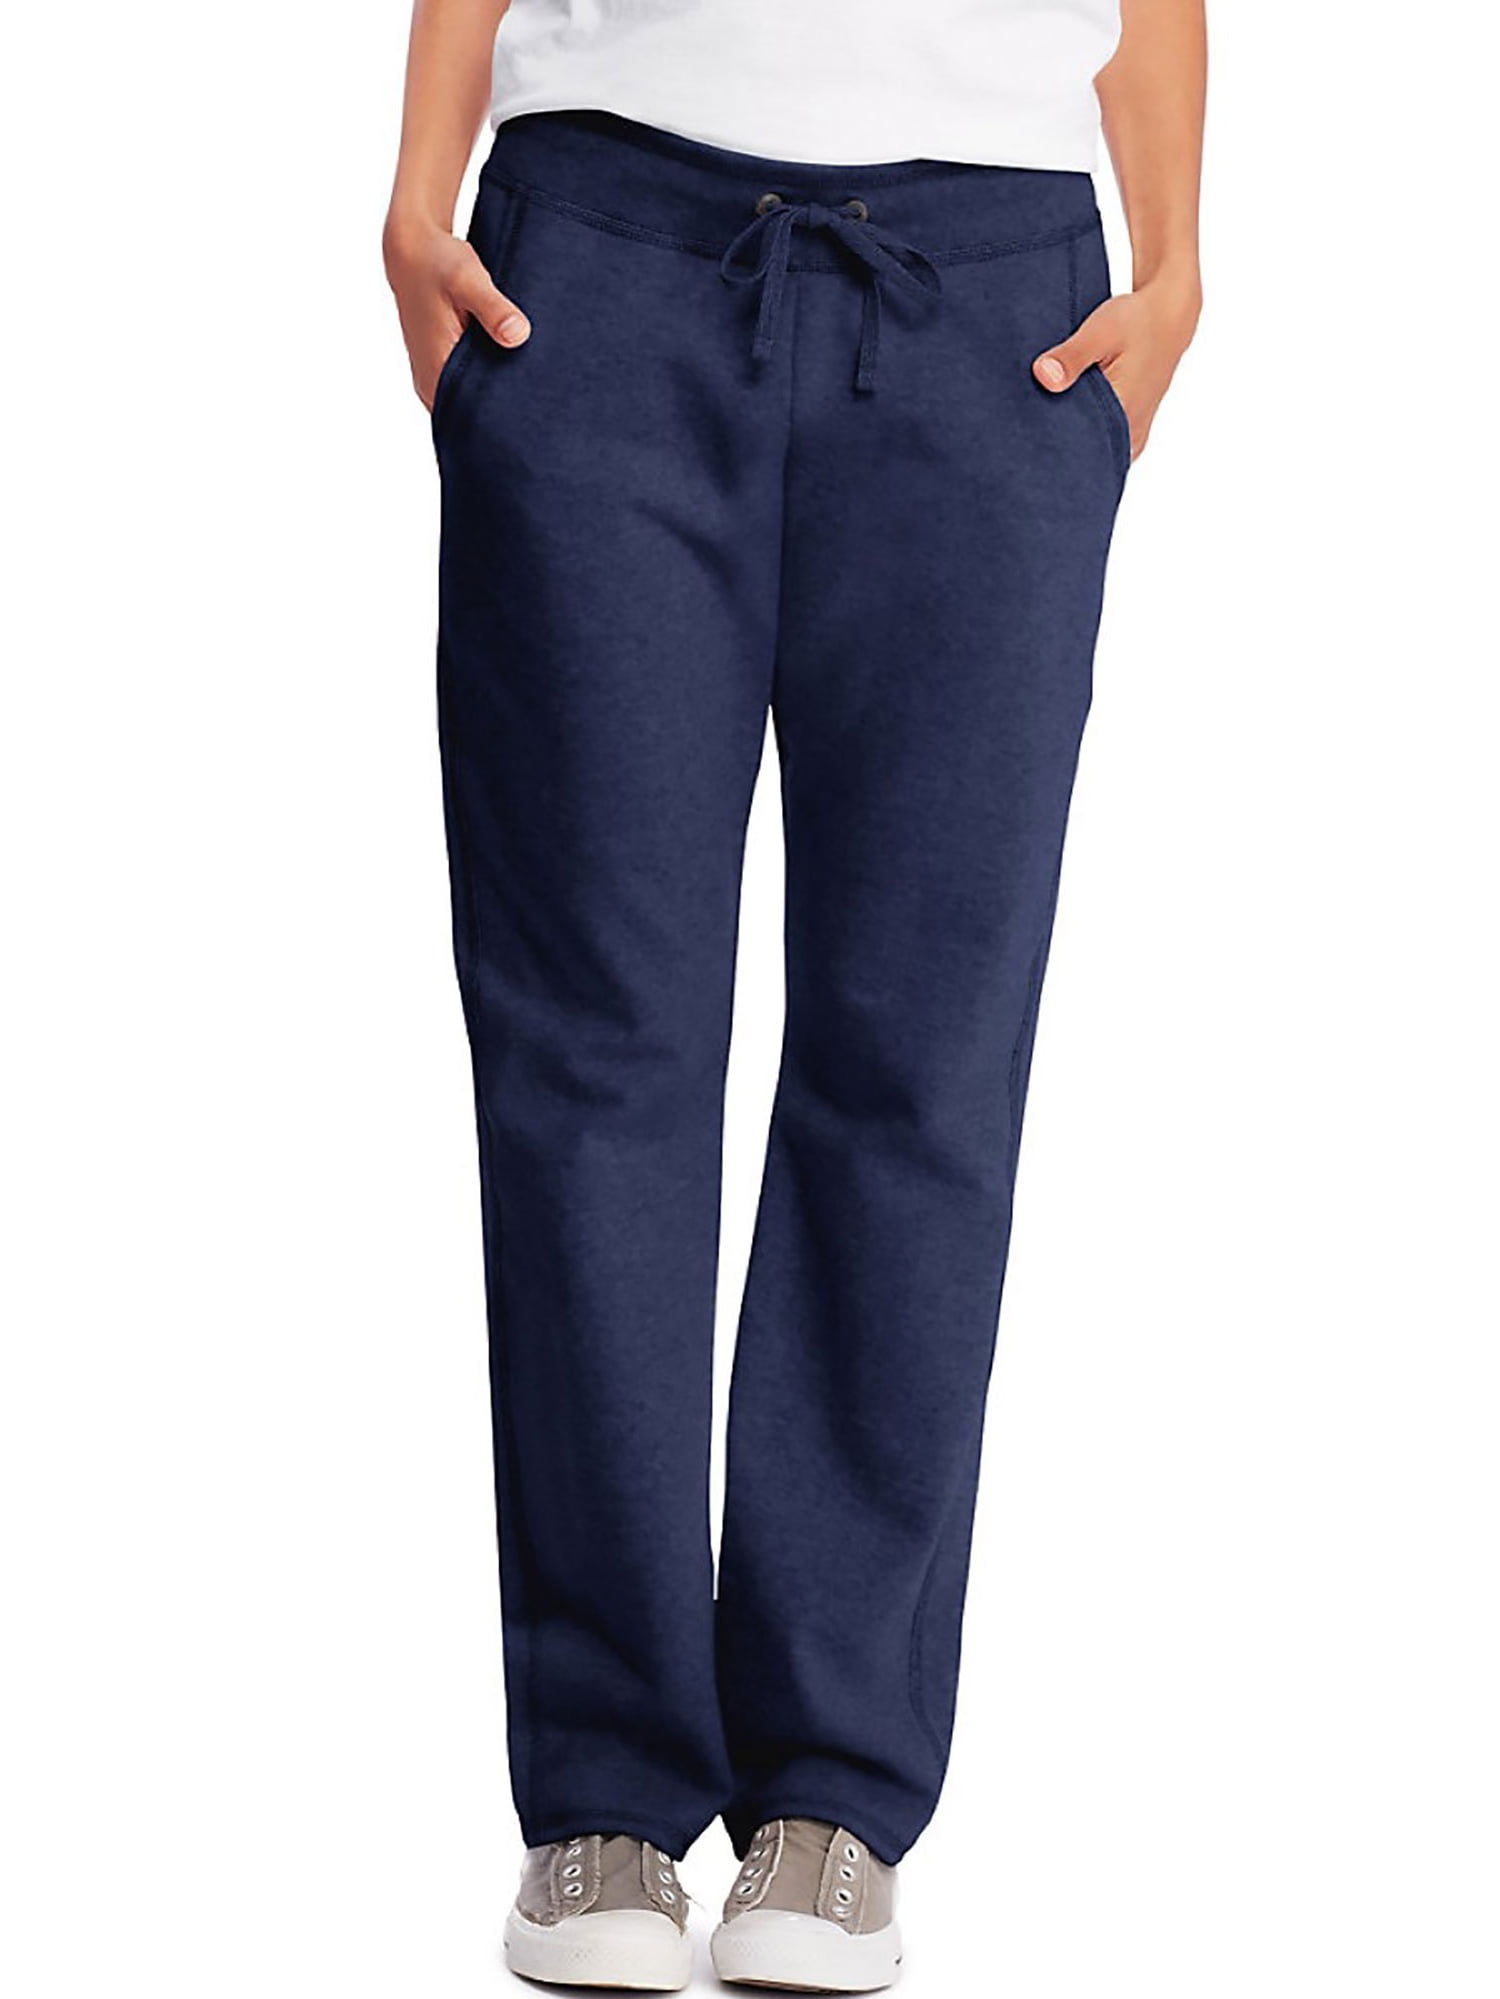 Hanes Women's French Terry Pocket Pant, Style O4677 